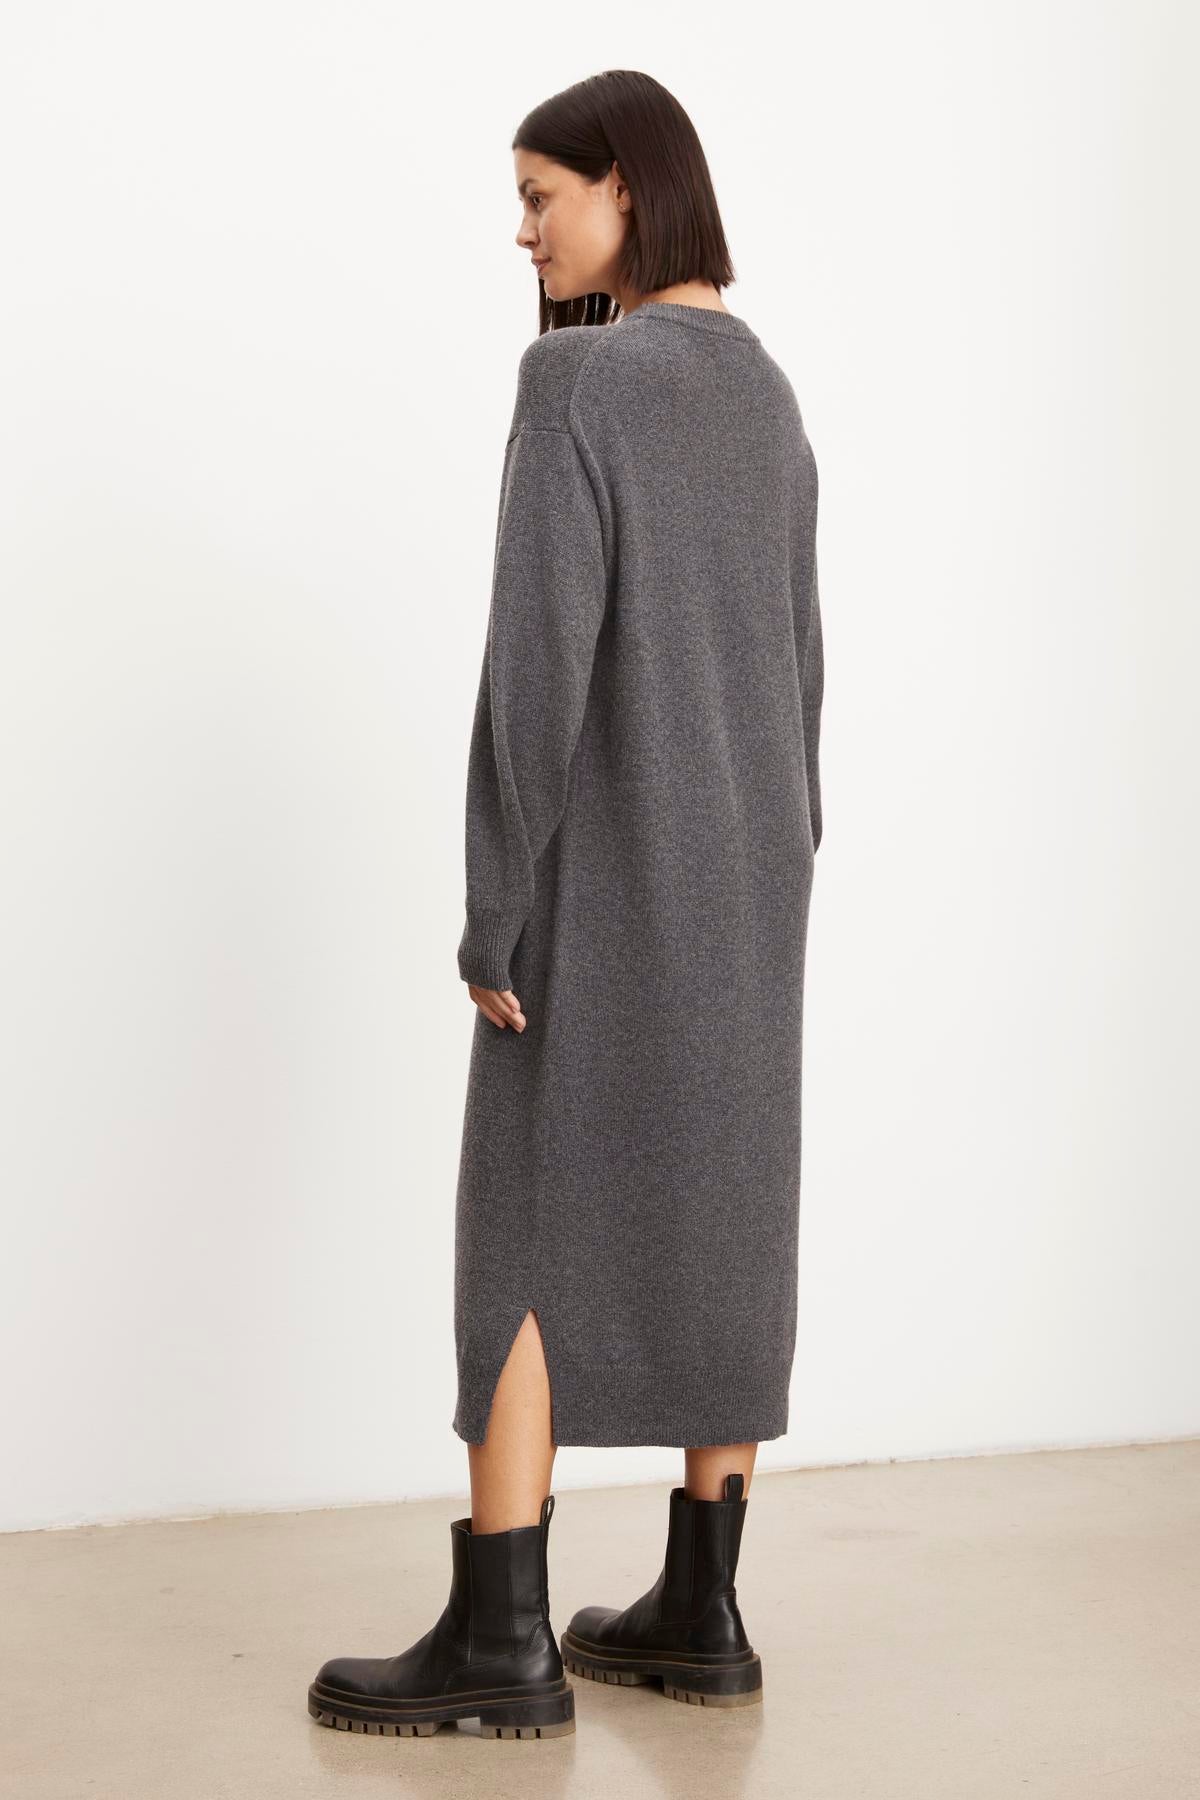 Woman in a long grey cardigan and black boots, standing sideways against a white background, wearing Velvet by Graham & Spencer's KADEN SWEATER DRESS with a side split hem.-35655585300673